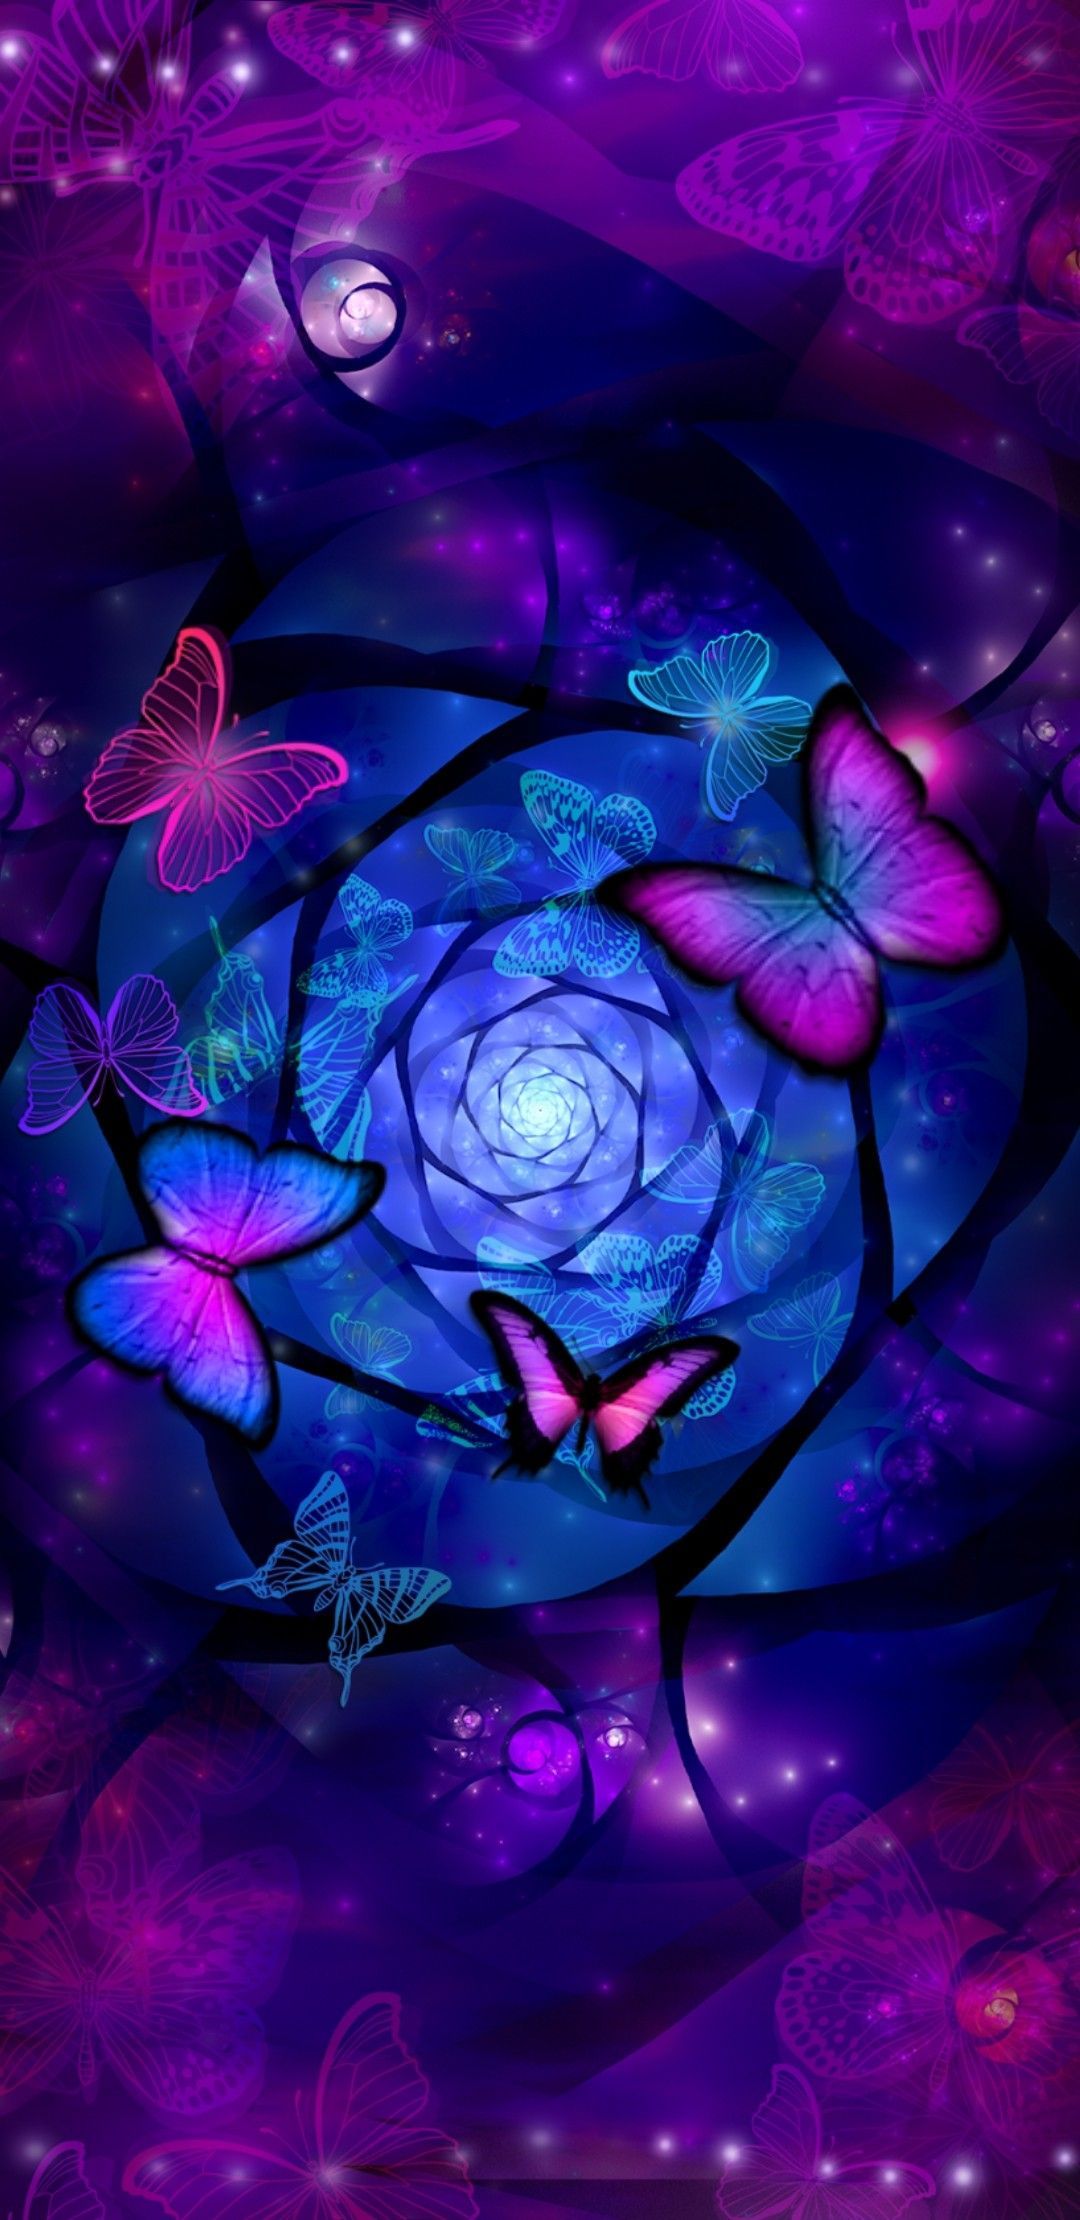 Cute Blue and Purple Wallpaper Free Cute Blue and Purple Background